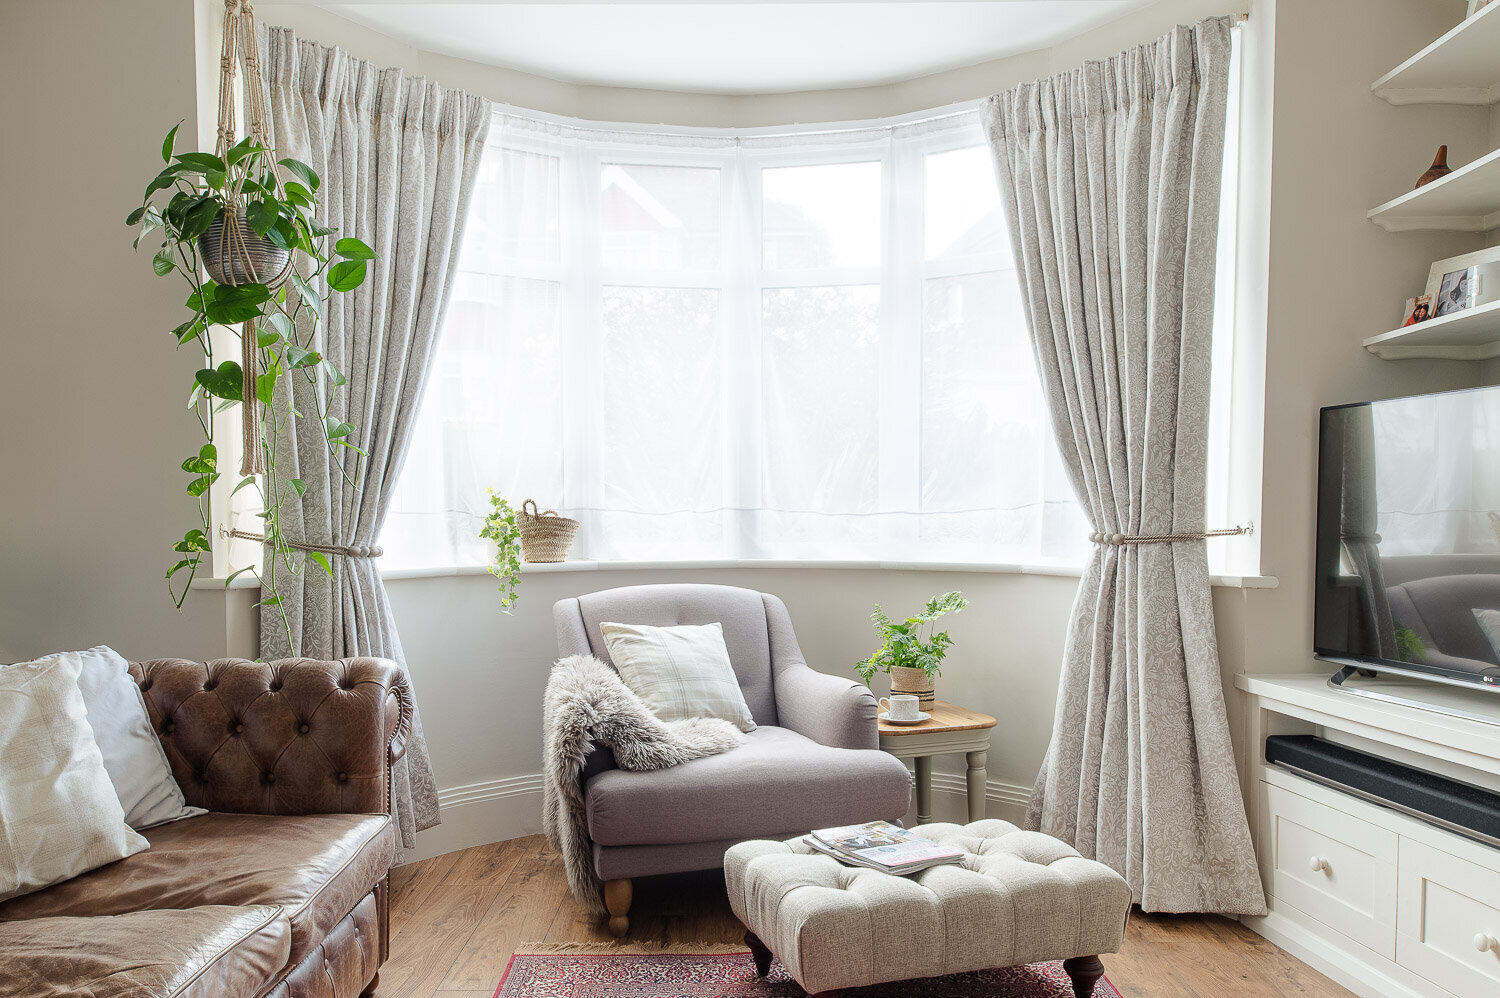 How To Hang Bay Window Curtains